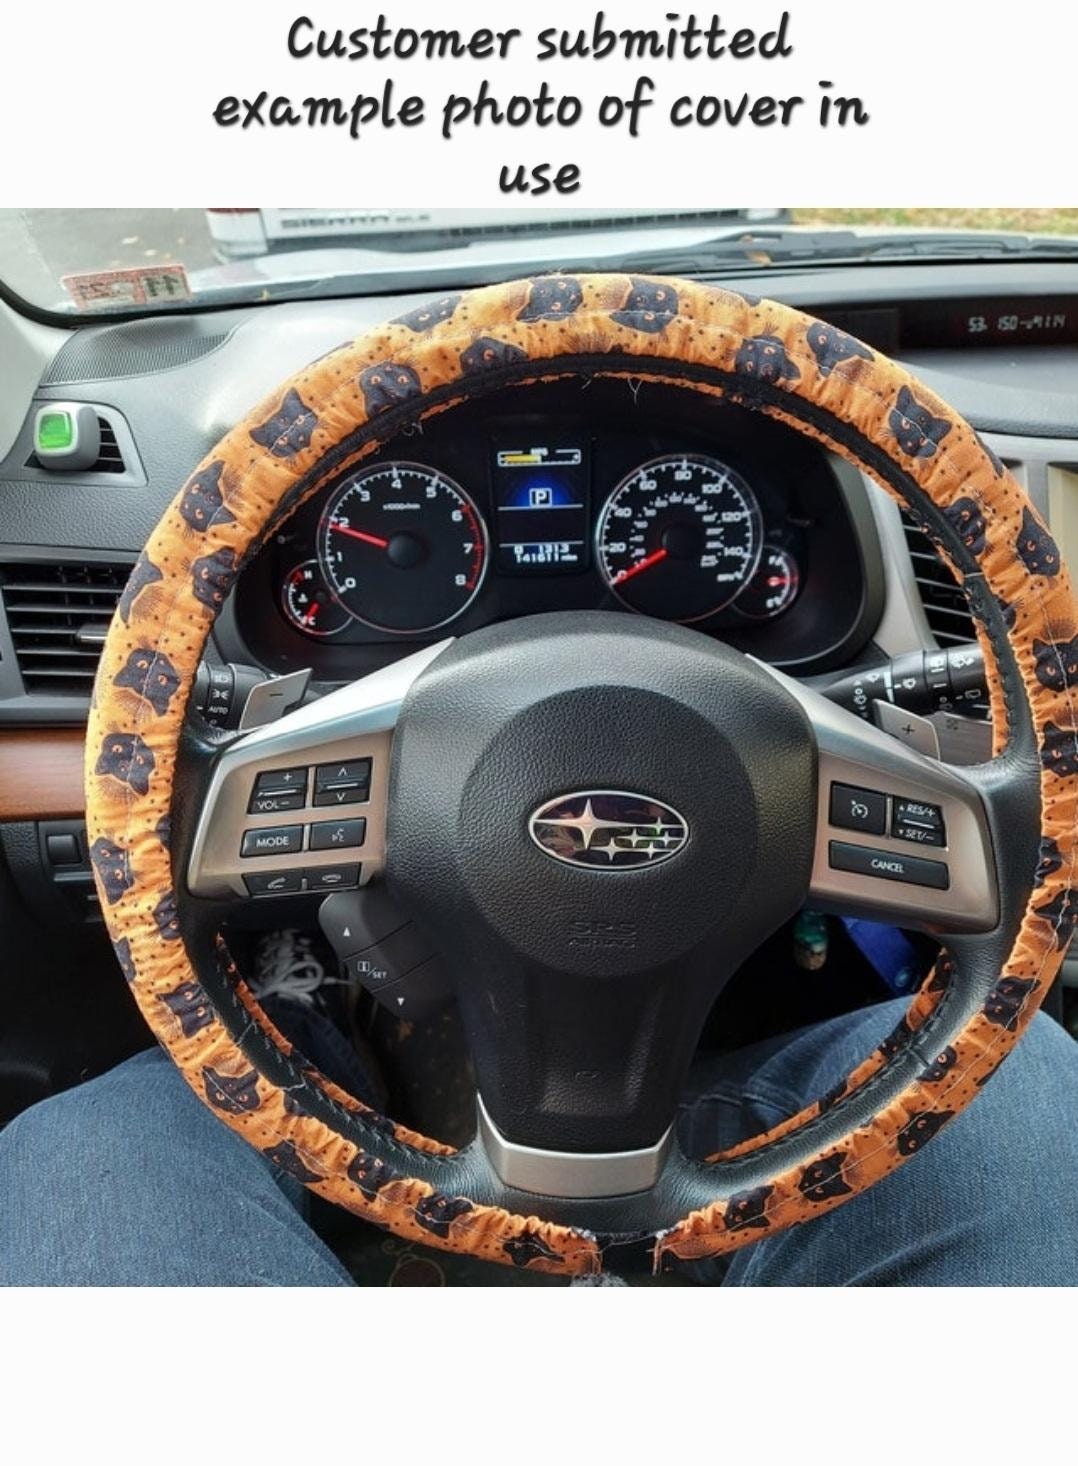 SW Sugar Skull Steering Wheel Cover made with Licensed Disney Fabric, 100% Cotton, Washable, Custom Car Accessories - Harlow's Store and Garden Gifts